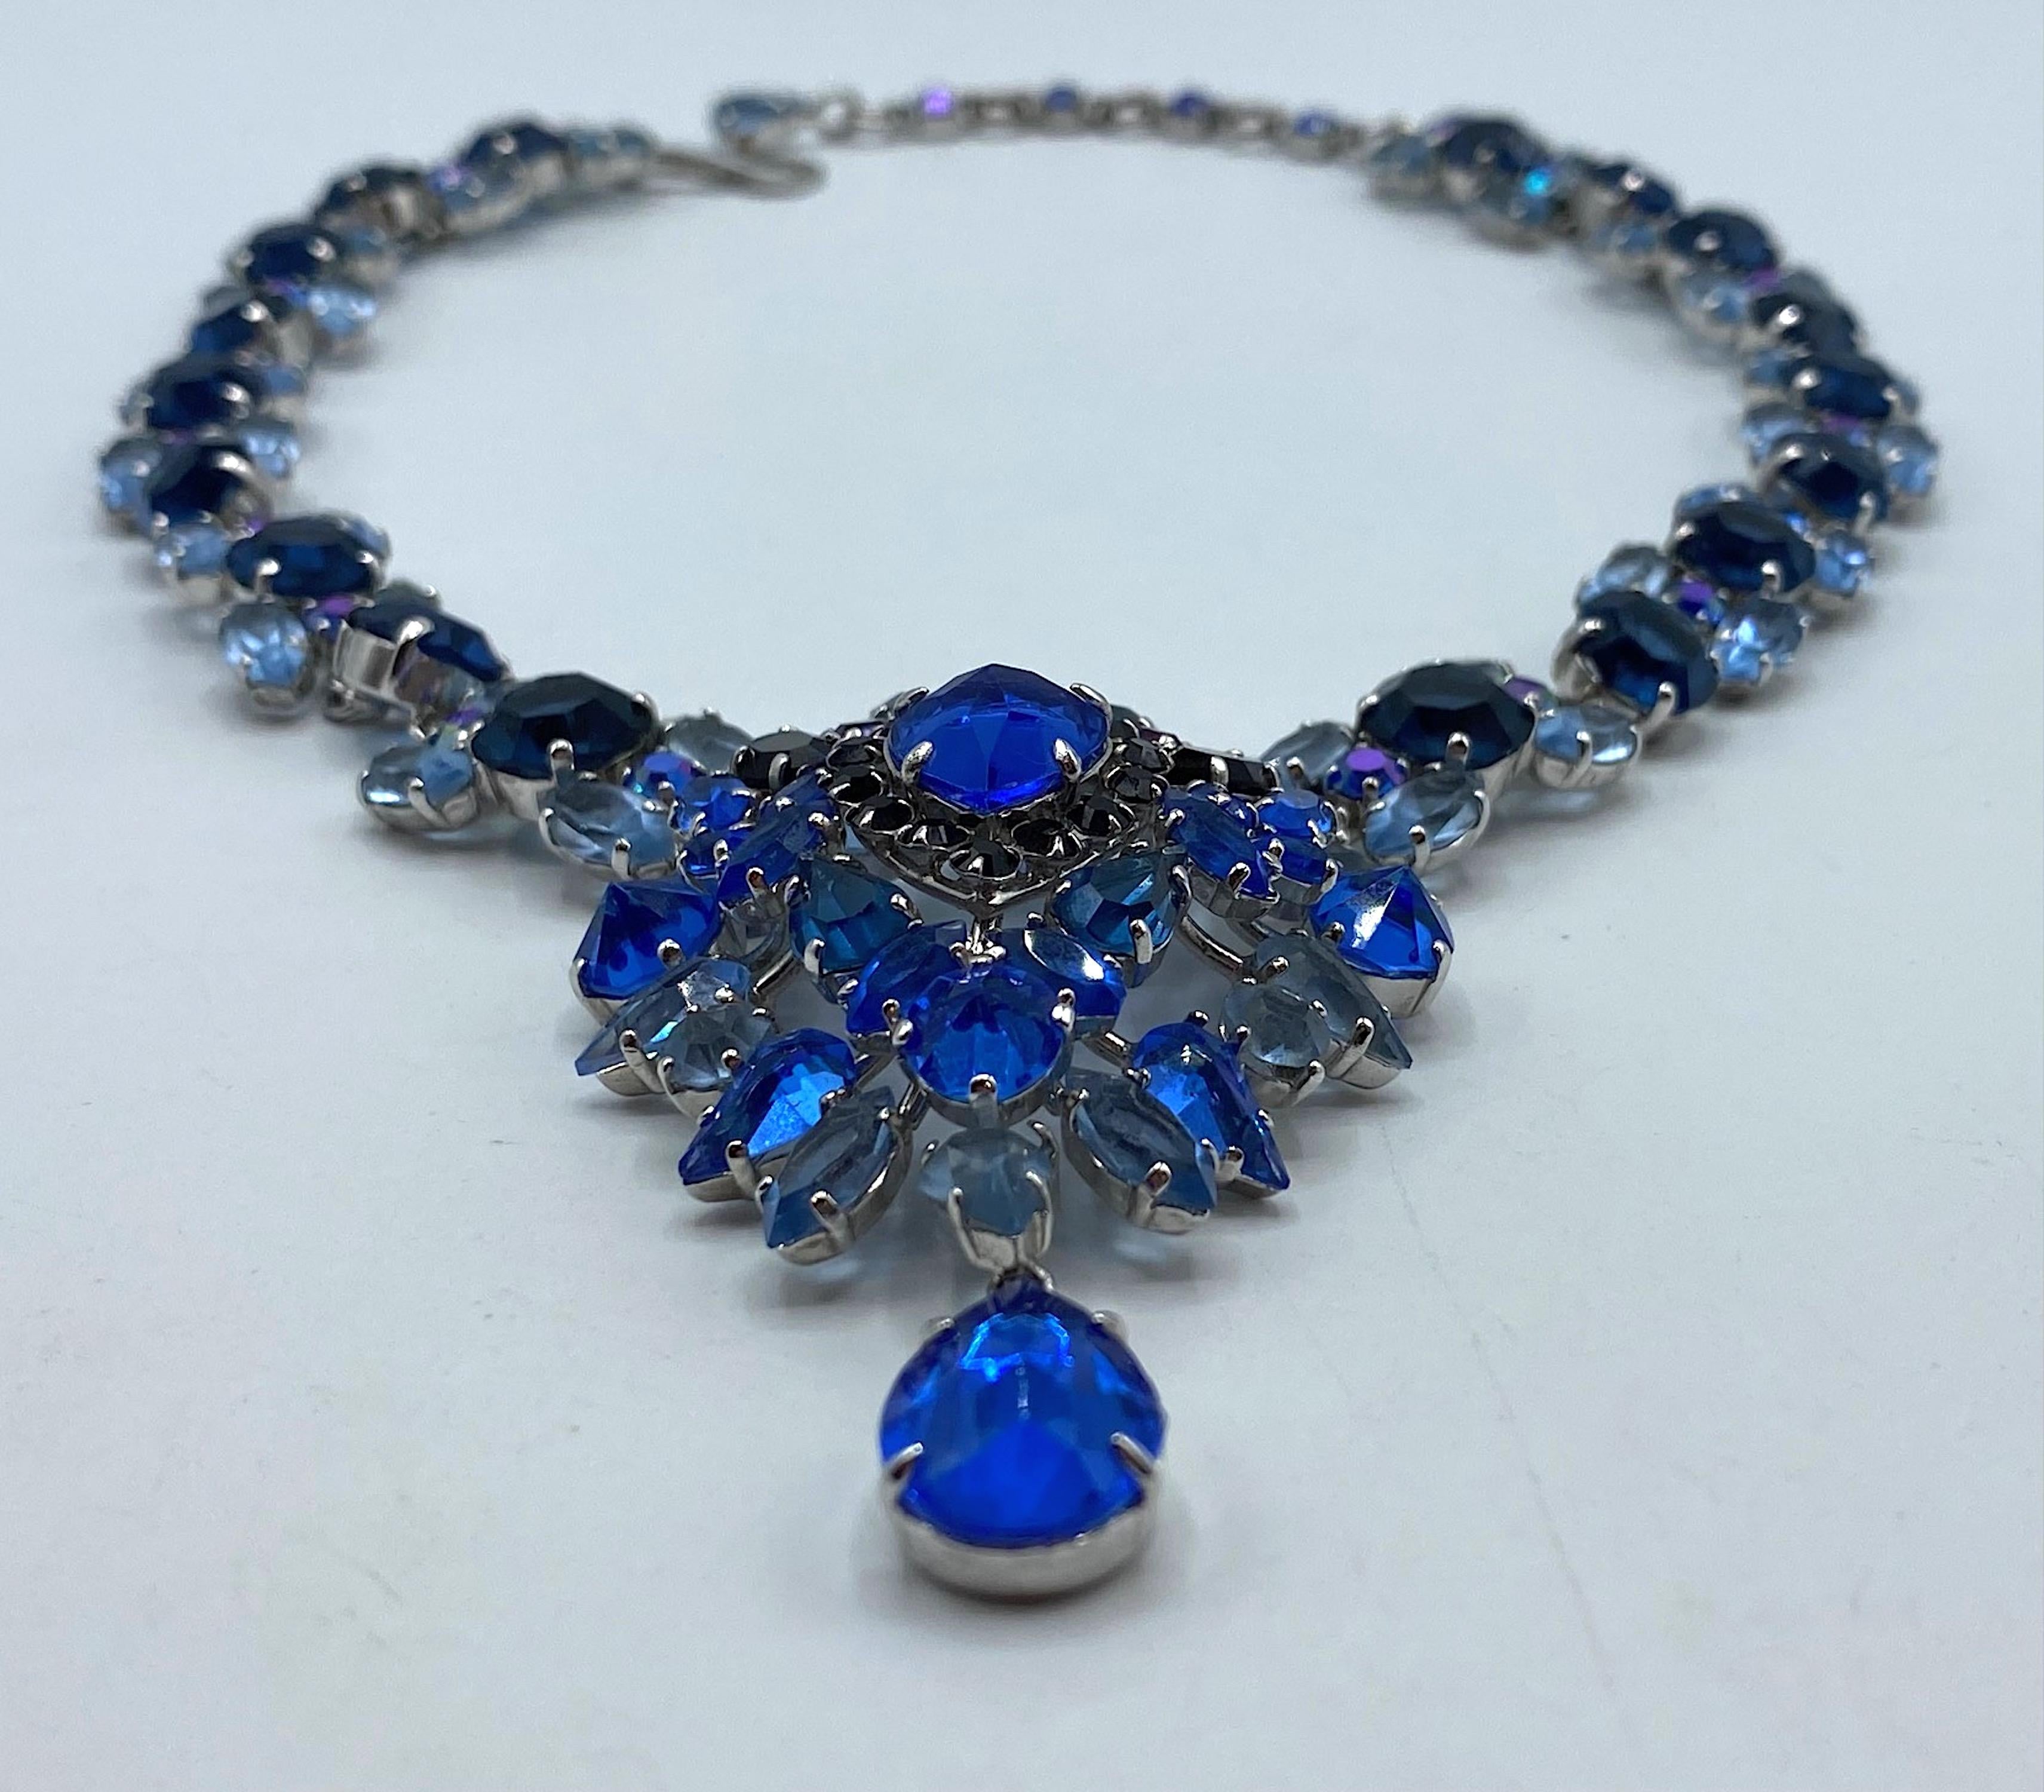 Christian Dior 1959 Shades of Blue Rhinestone Necklace by Henkel & Grosse' 6